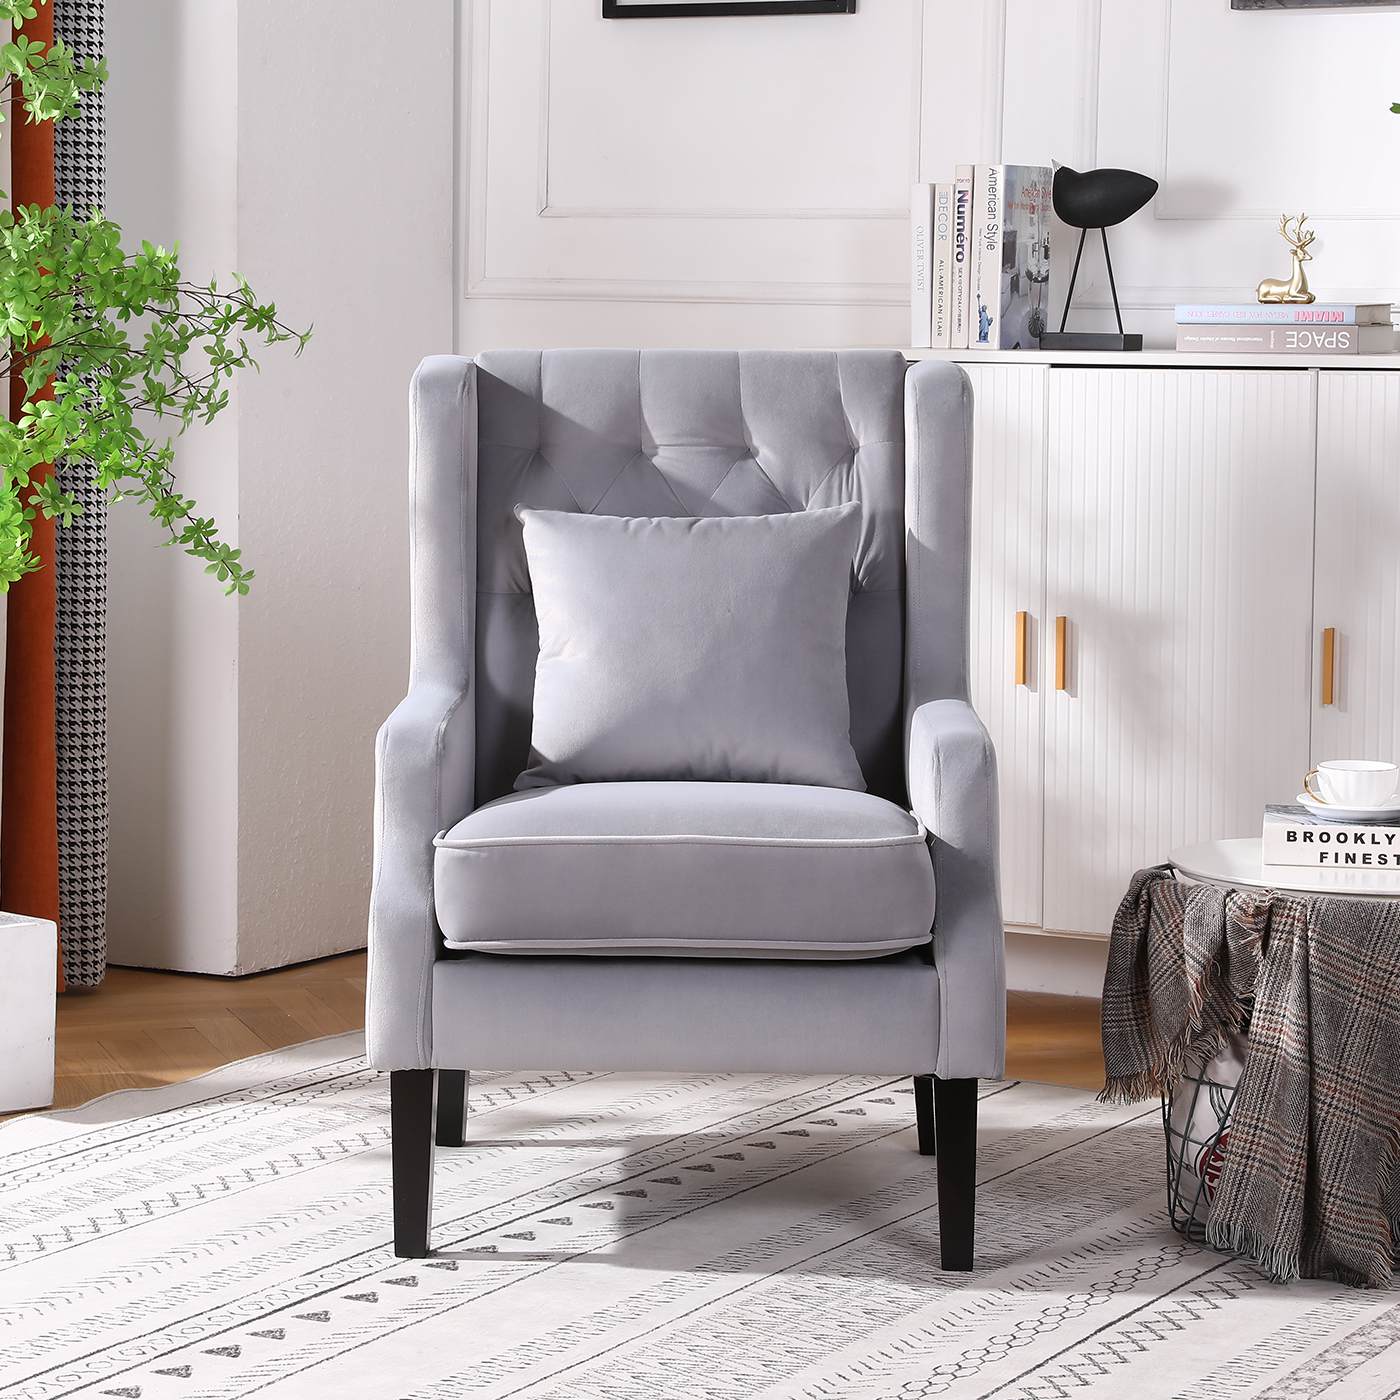 Vanbow.Modern chair with backrest, Bedroom, Living room, Reading chair(Light Grey)